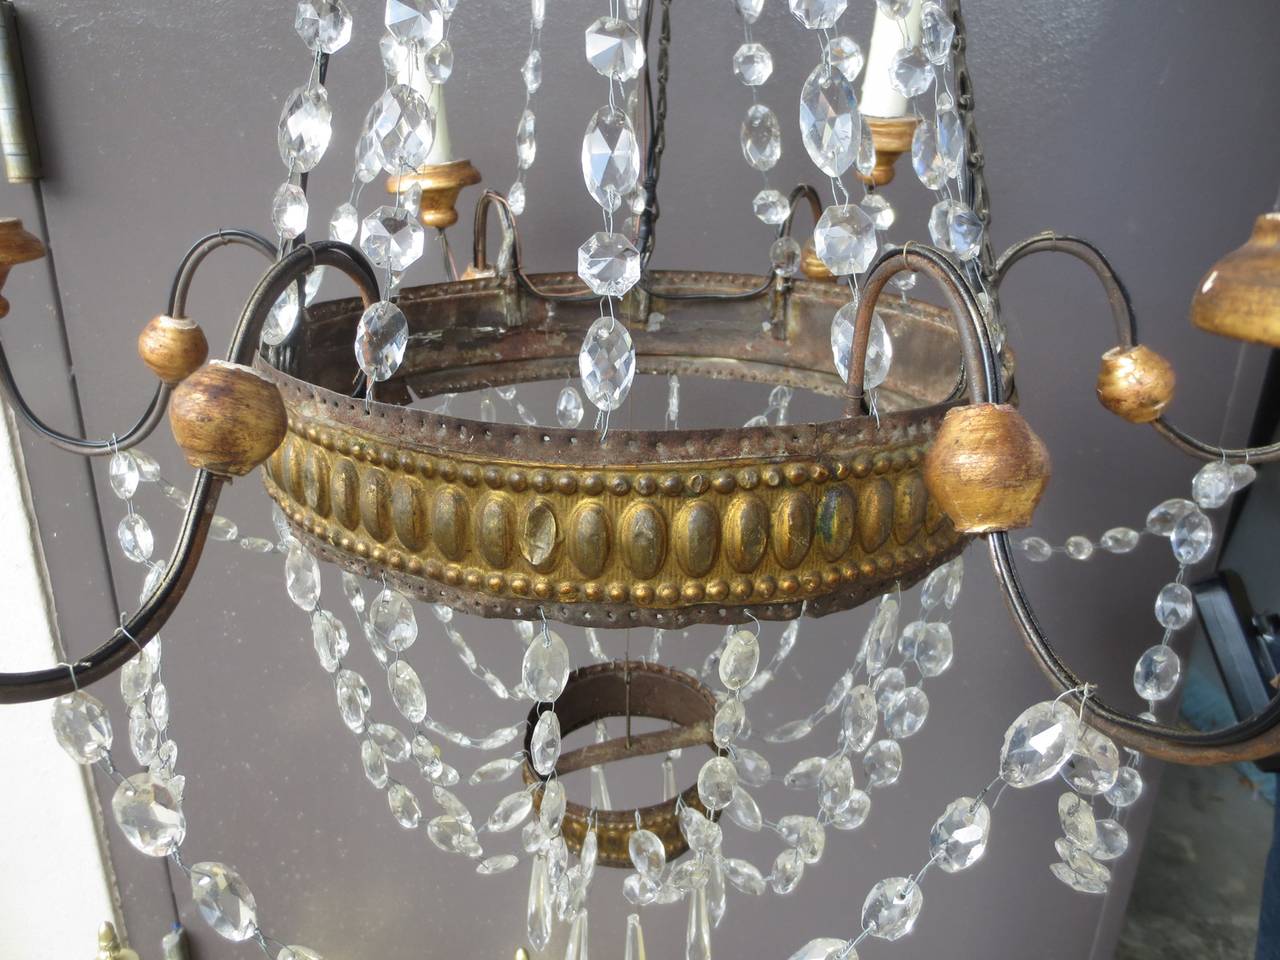 Pair of 18th-19th century Italian tole and crystal chandeliers.